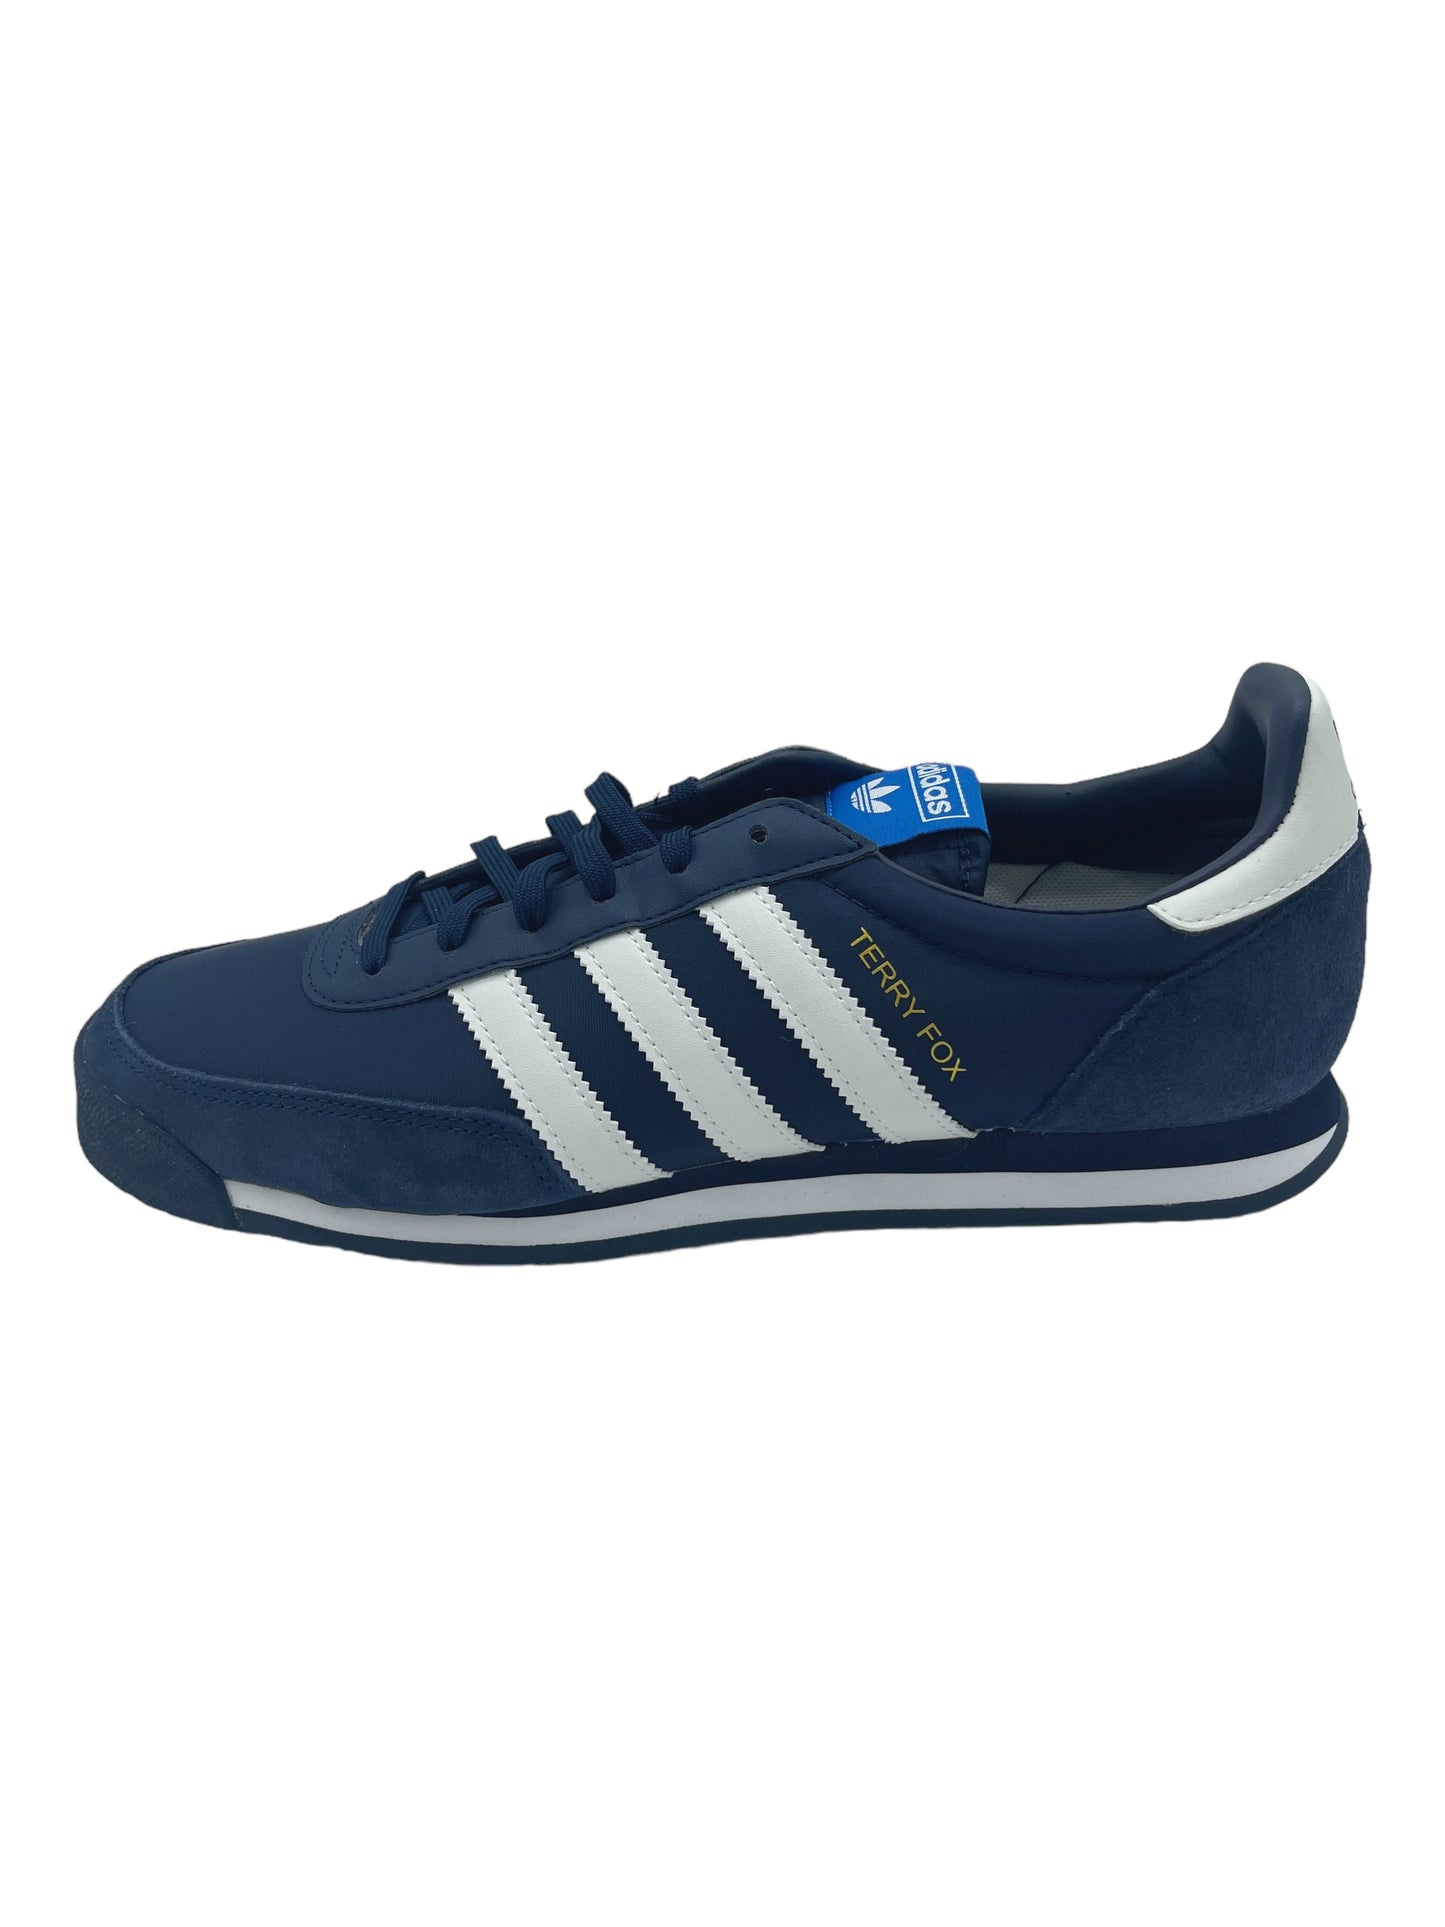 Adidas Navy Blue Terry Fox 40th Anniversary Sneakers 9 M / 10.5 W